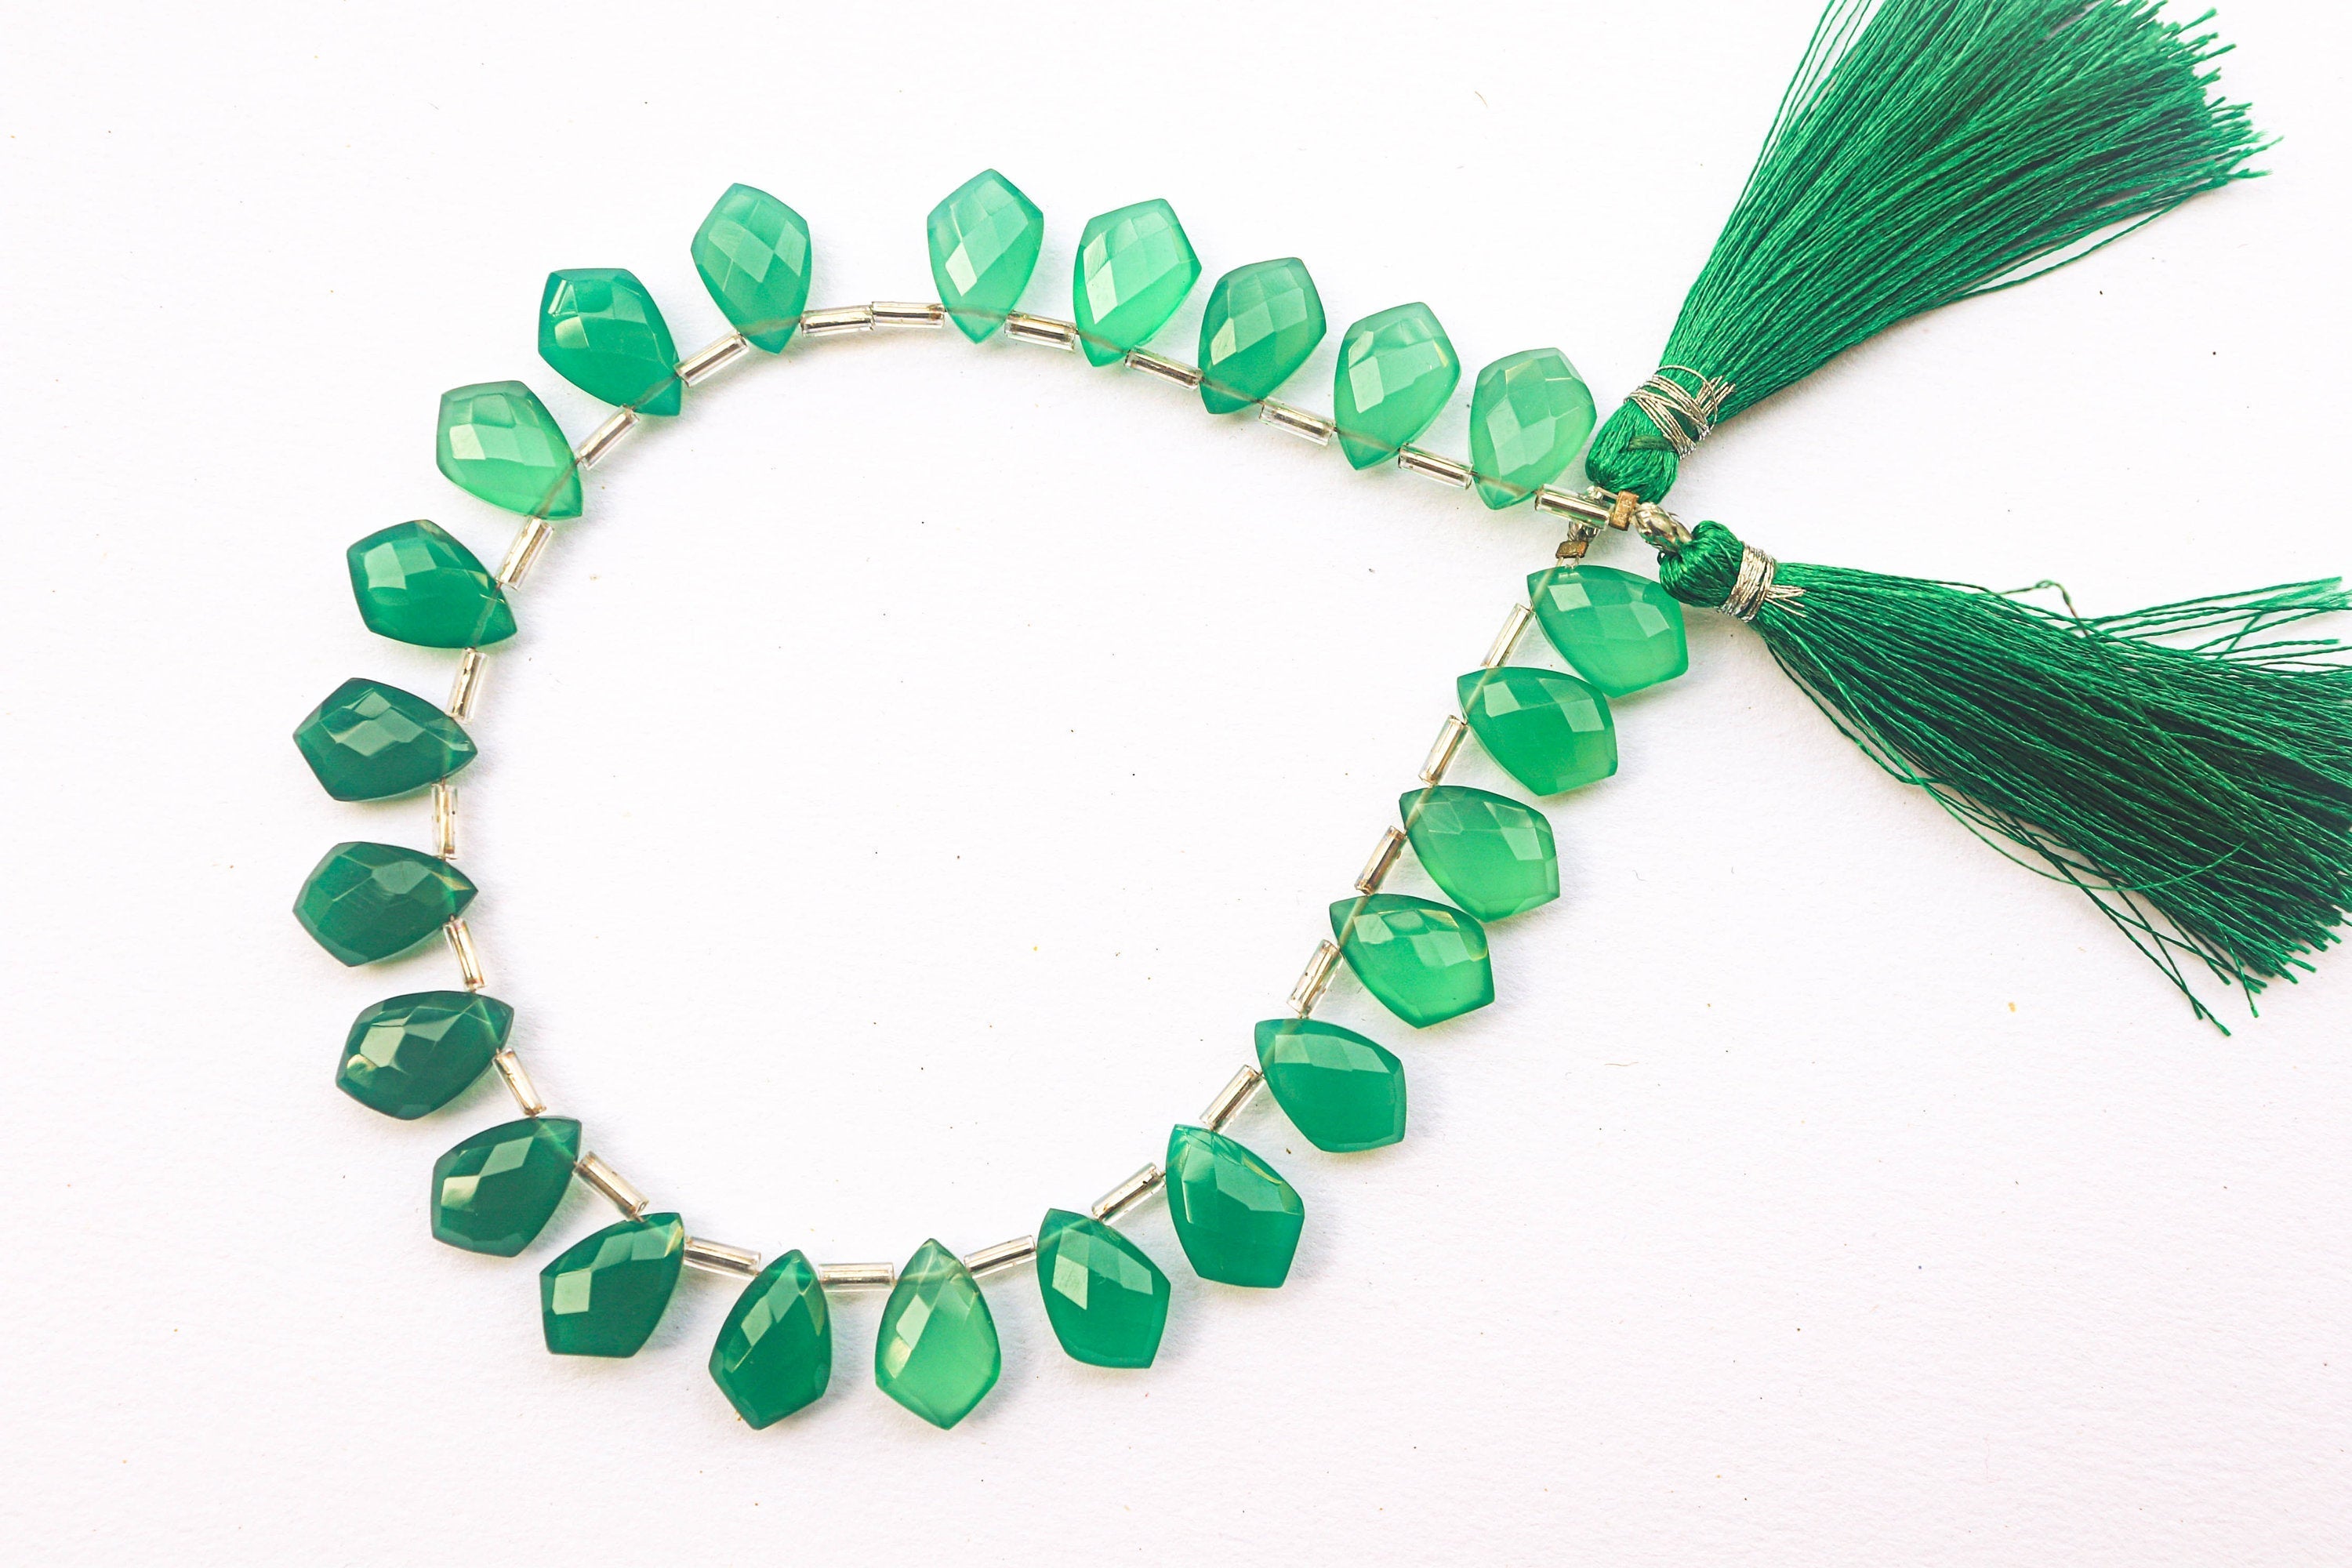 Green Onyx Fancy Shape Faceted Briolette | 8x12mm | 23 Pieces Strand | Beadsforyourjewelry Beadsforyourjewelry